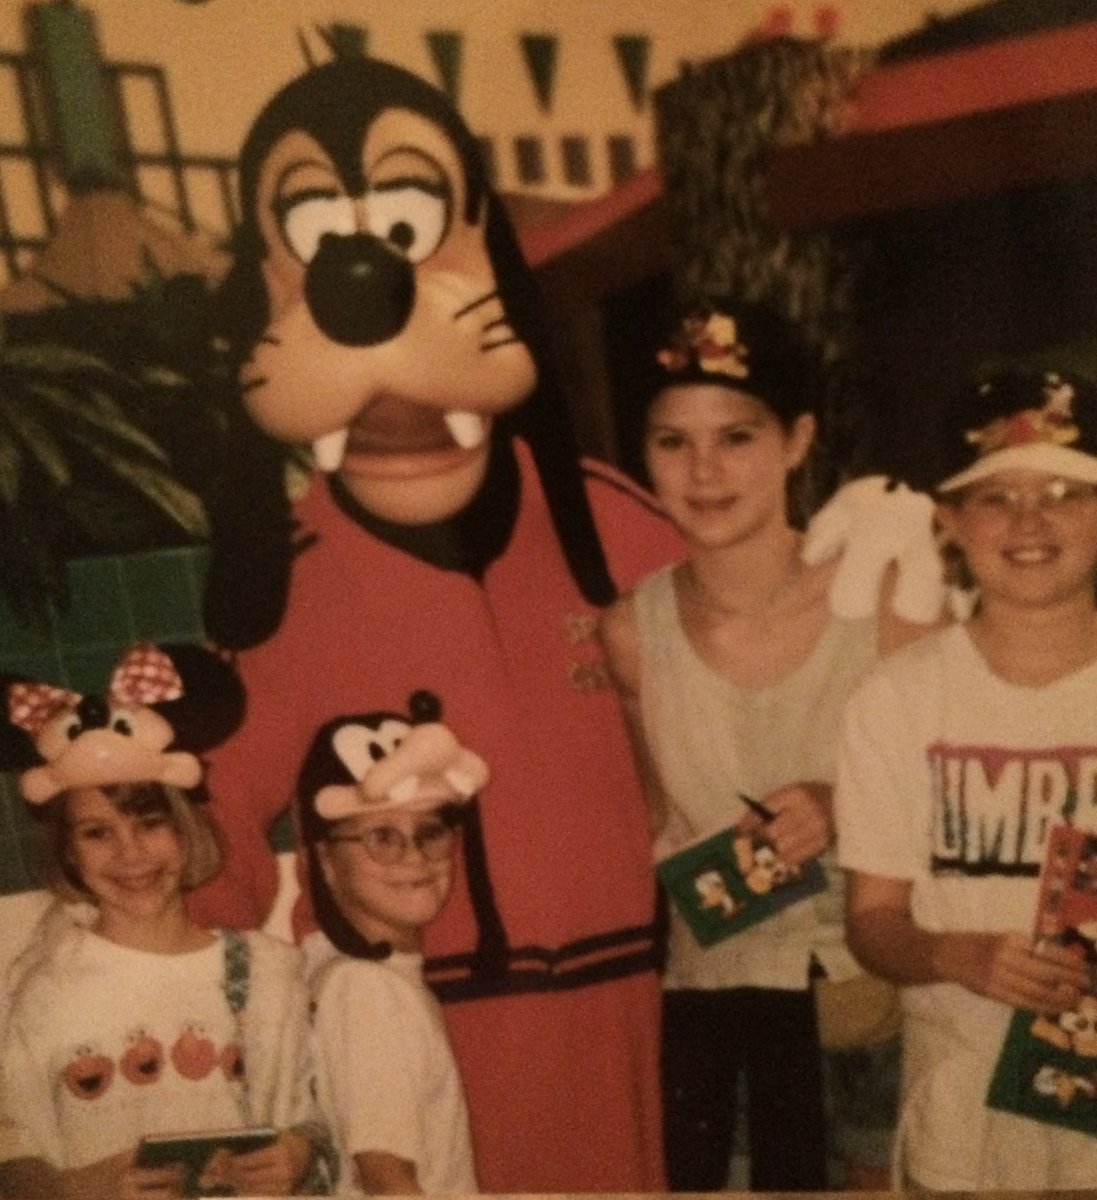 Happy national sibling day to my sisters and only brother Goofy